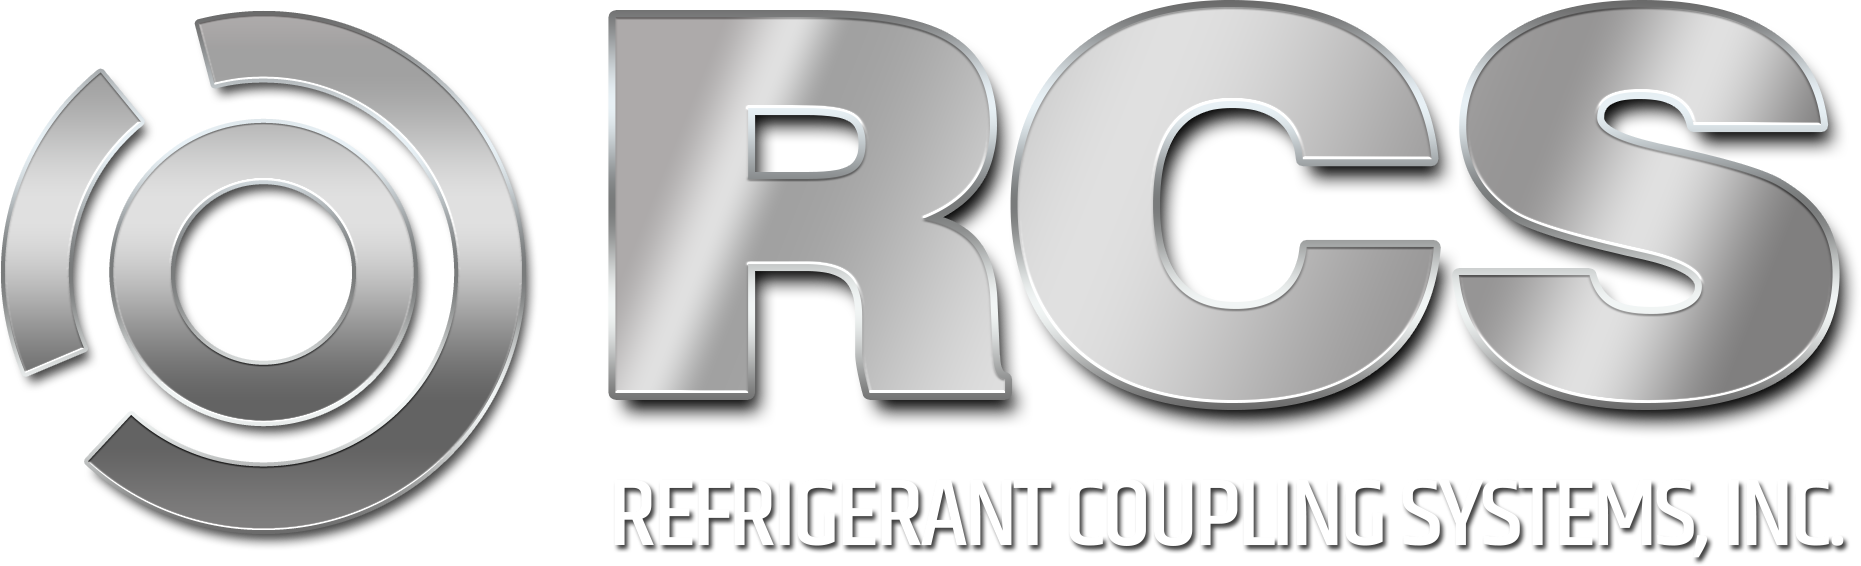 Refrigerant Coupling Systems, Inc.